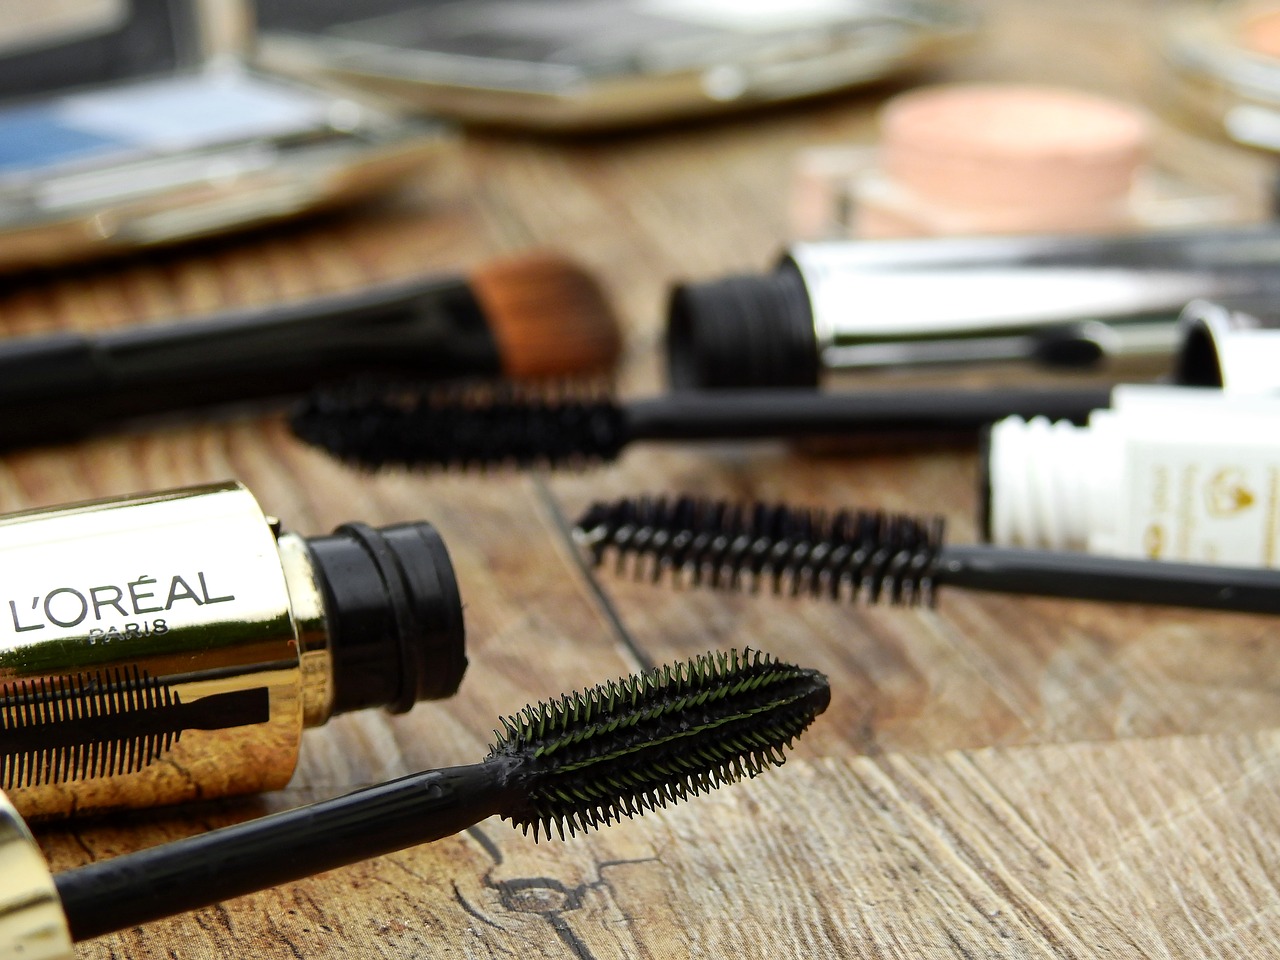 The different mascara brushes